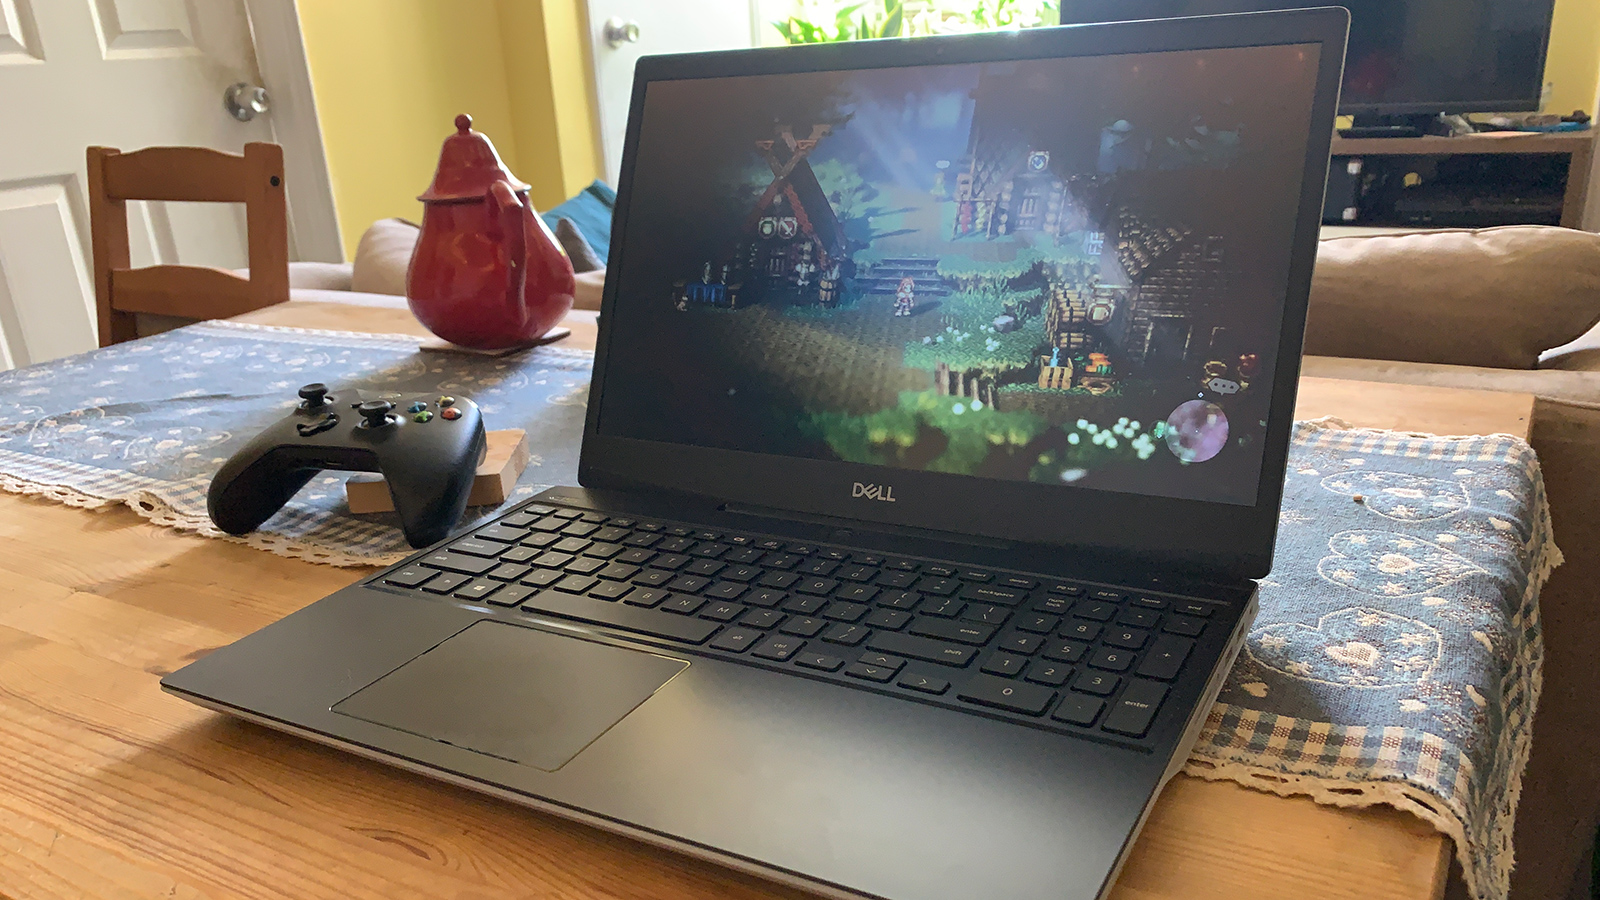 AMD could have a secret weapon to make gaming laptops better